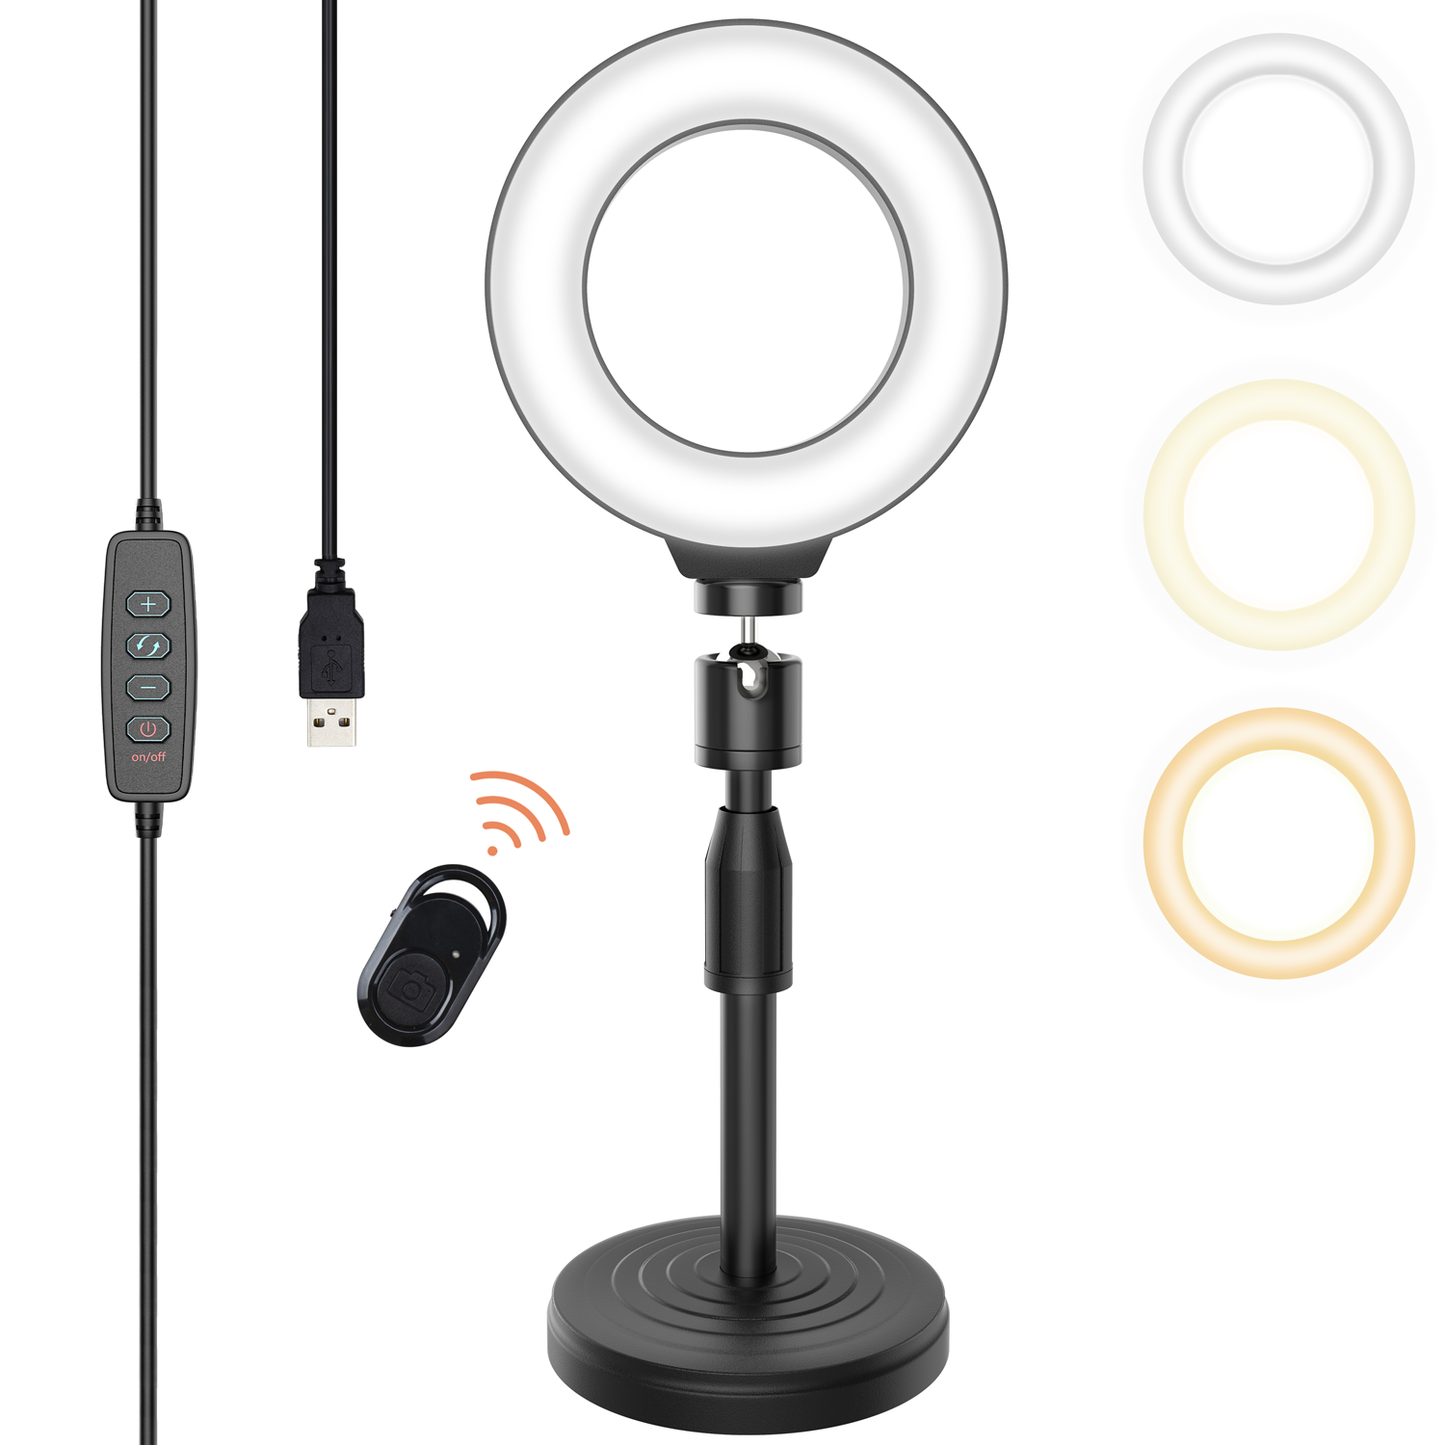 Jeemak 6'' Selfie Ring Light with Stand Desktop LED Circle Light for Phone Laptop Computer 3 Colors USB Ringlight with Remote Control For Photography Makeup YouTube Video TikTok Live Stream